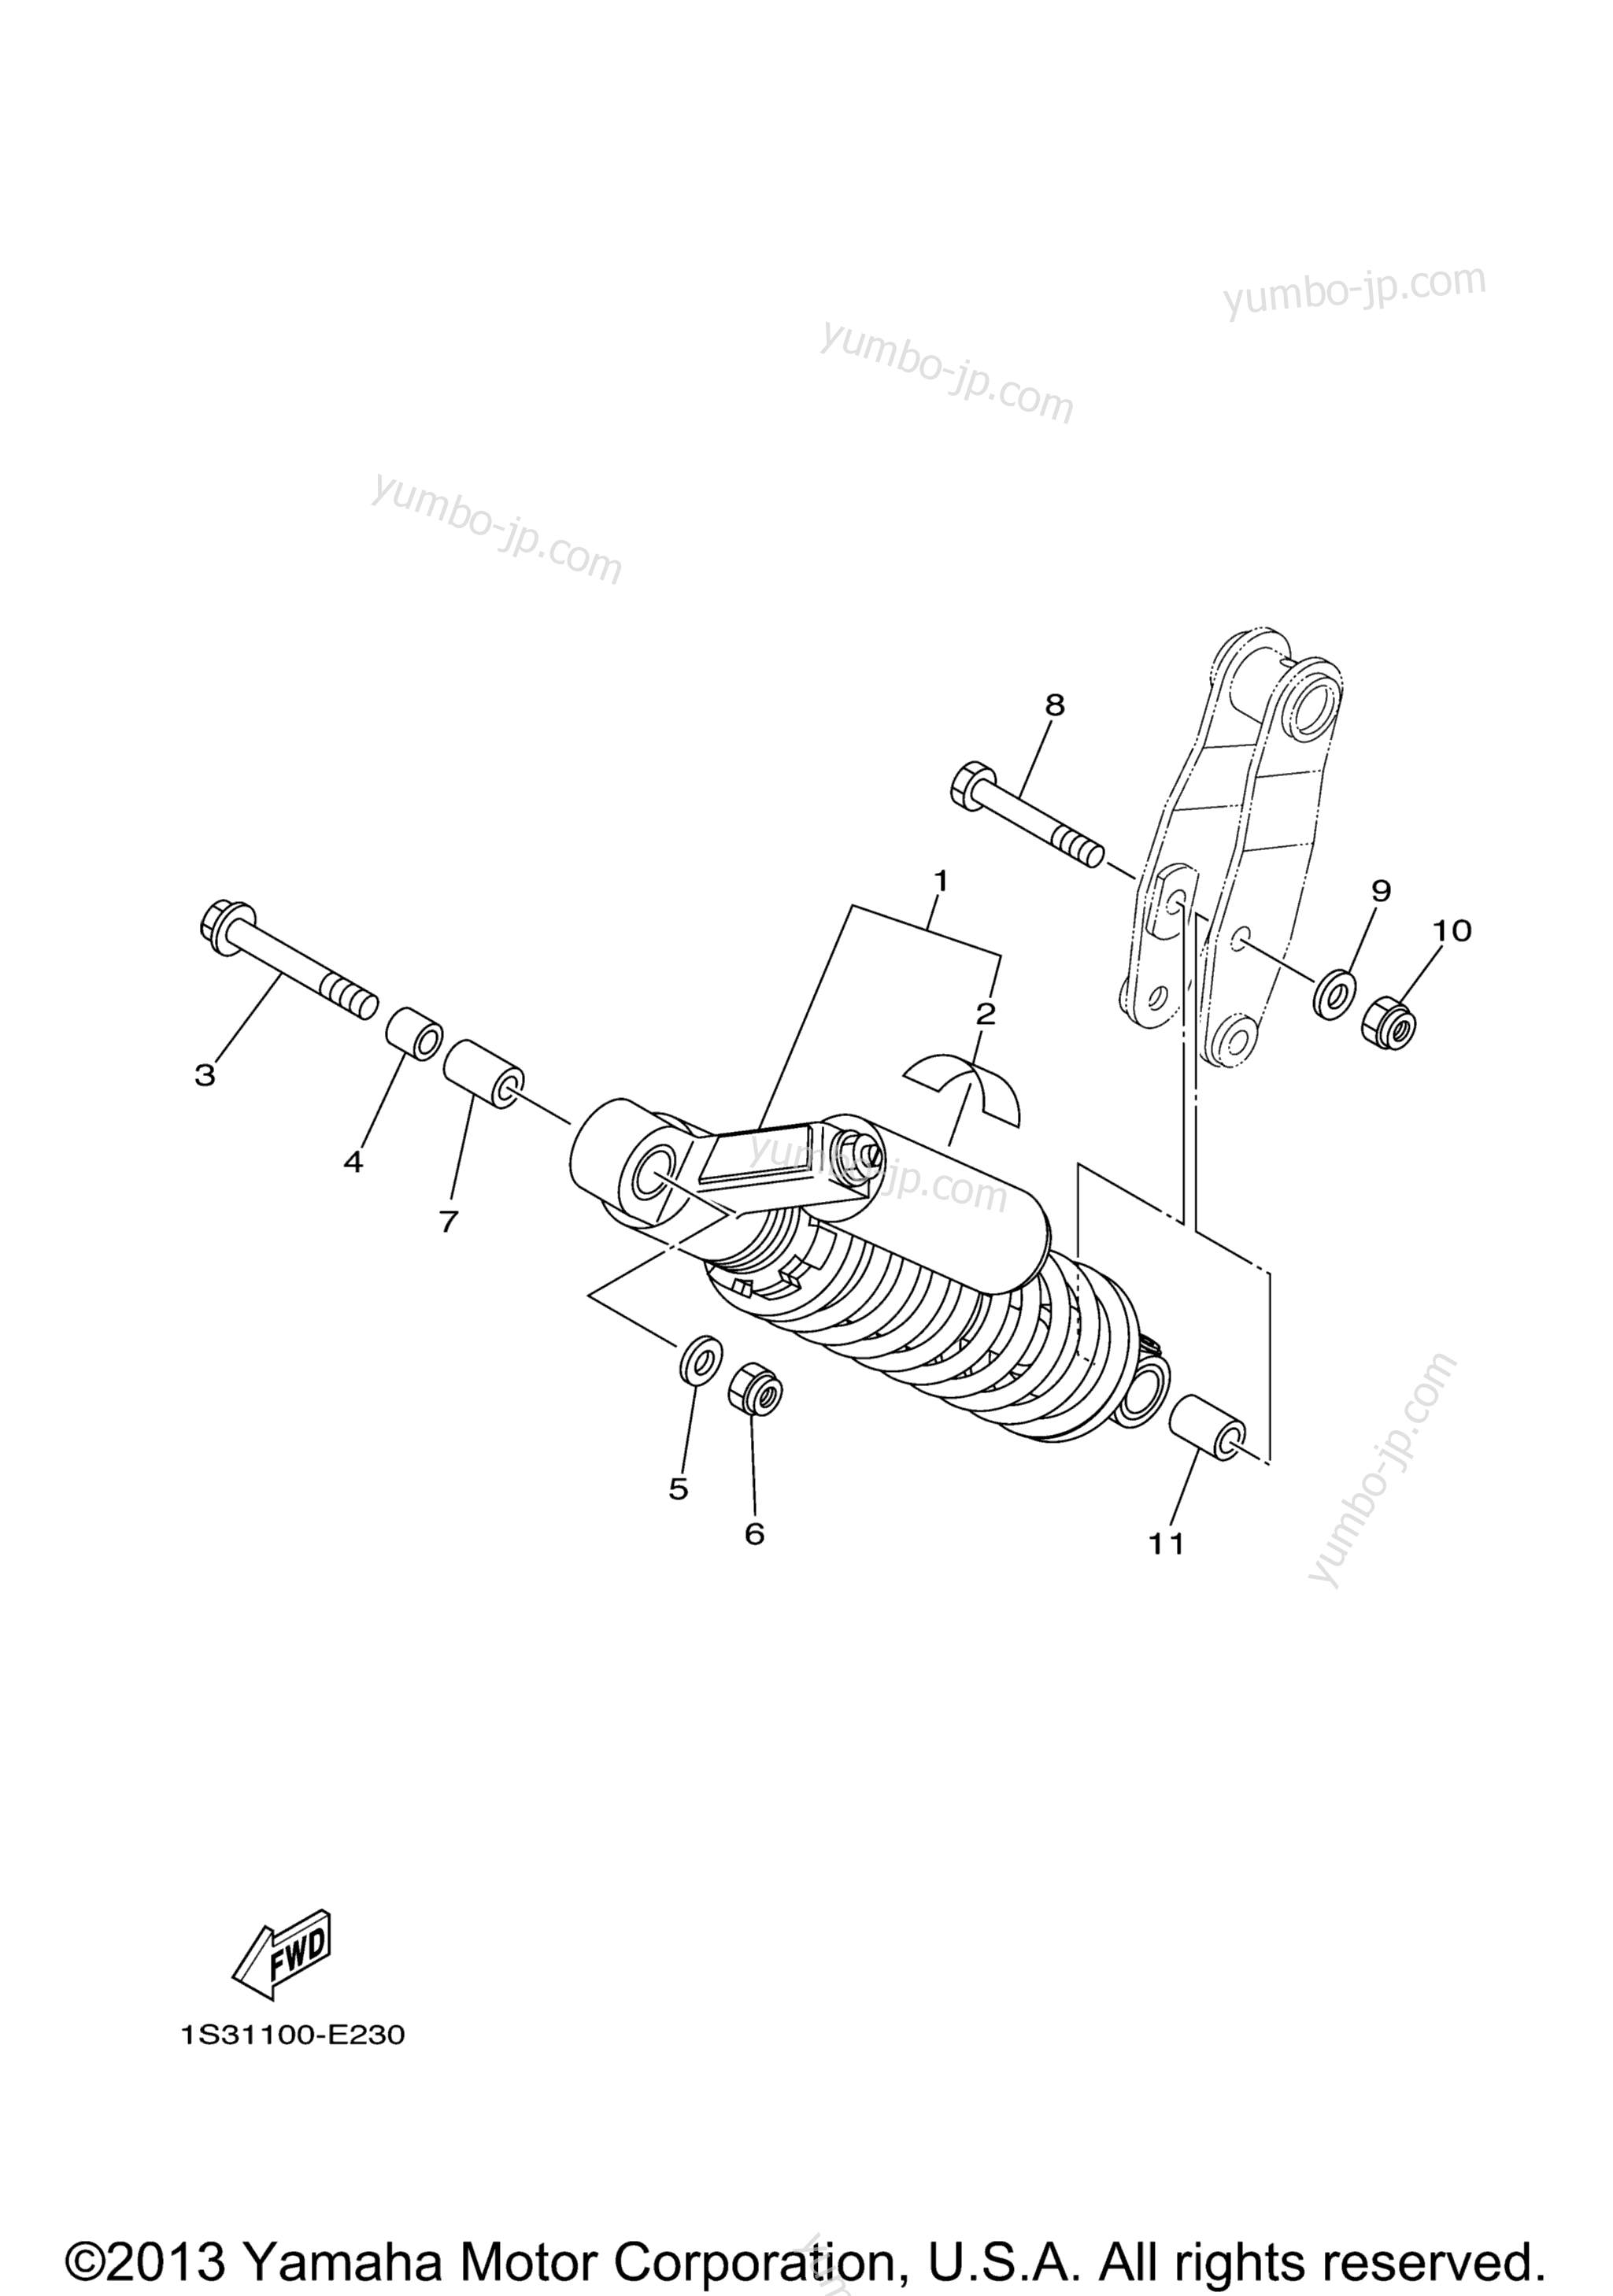 Rear Suspension for ATVs YAMAHA RAPTOR 700 SPECIAL EDITION (YFM70RSPX) 2008 year